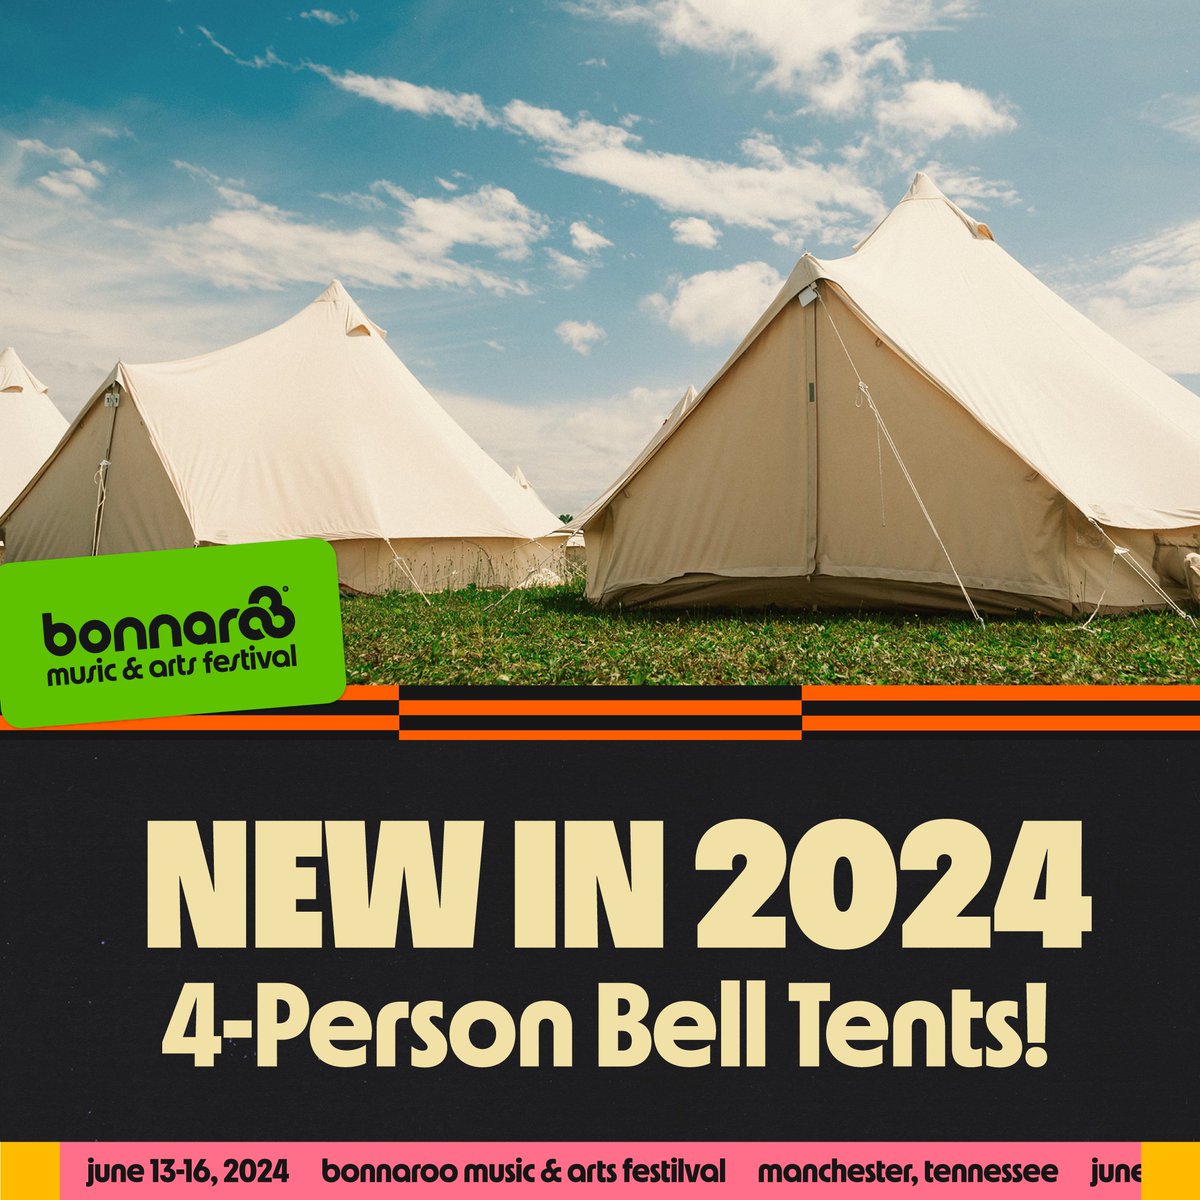 get the best of roo for you & your crew with a 4-person bell tent (& save some $ splitting it 4 ways!) 💫 ⛺️ 4 cots with souvenir sleeping bags & pillows ❄️ AC unit 🔌 outlets 🔒 combo lock 🚙 moon colony tollbooth for faster entry to the farm + more! bonnaroo.com/accommodations